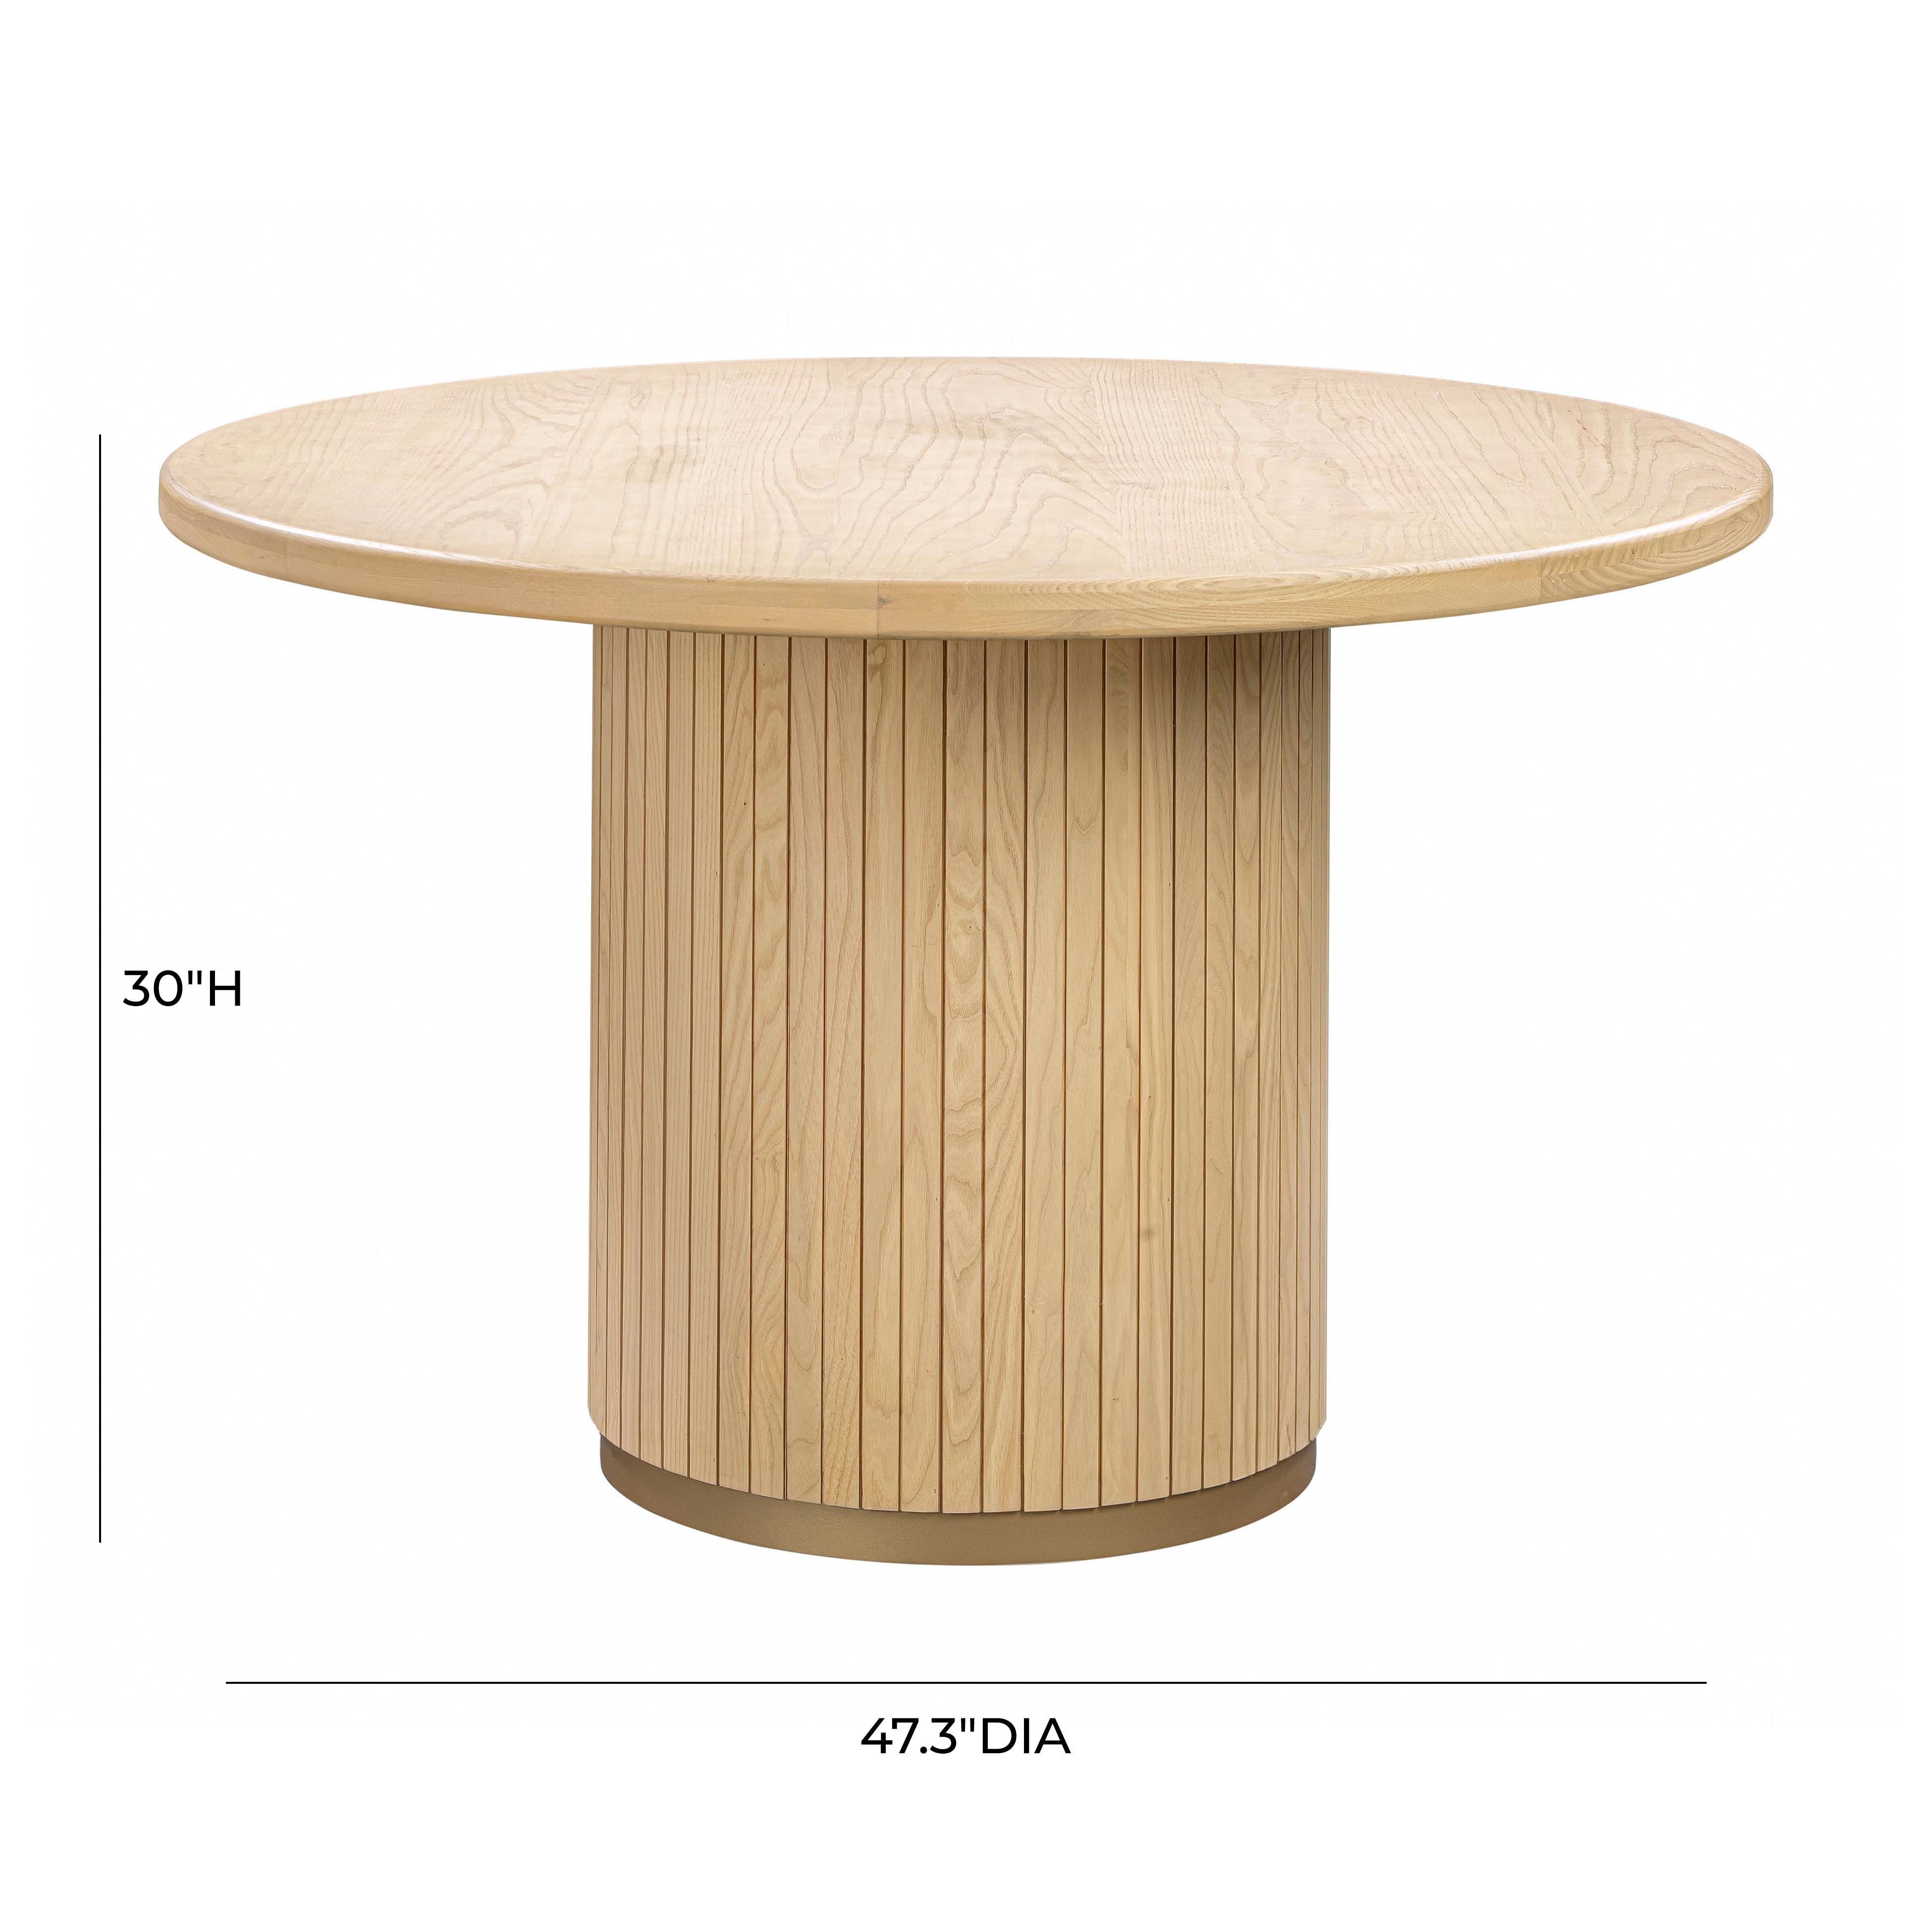 Chelsea Oak Wood Round Dining Table - Image 4